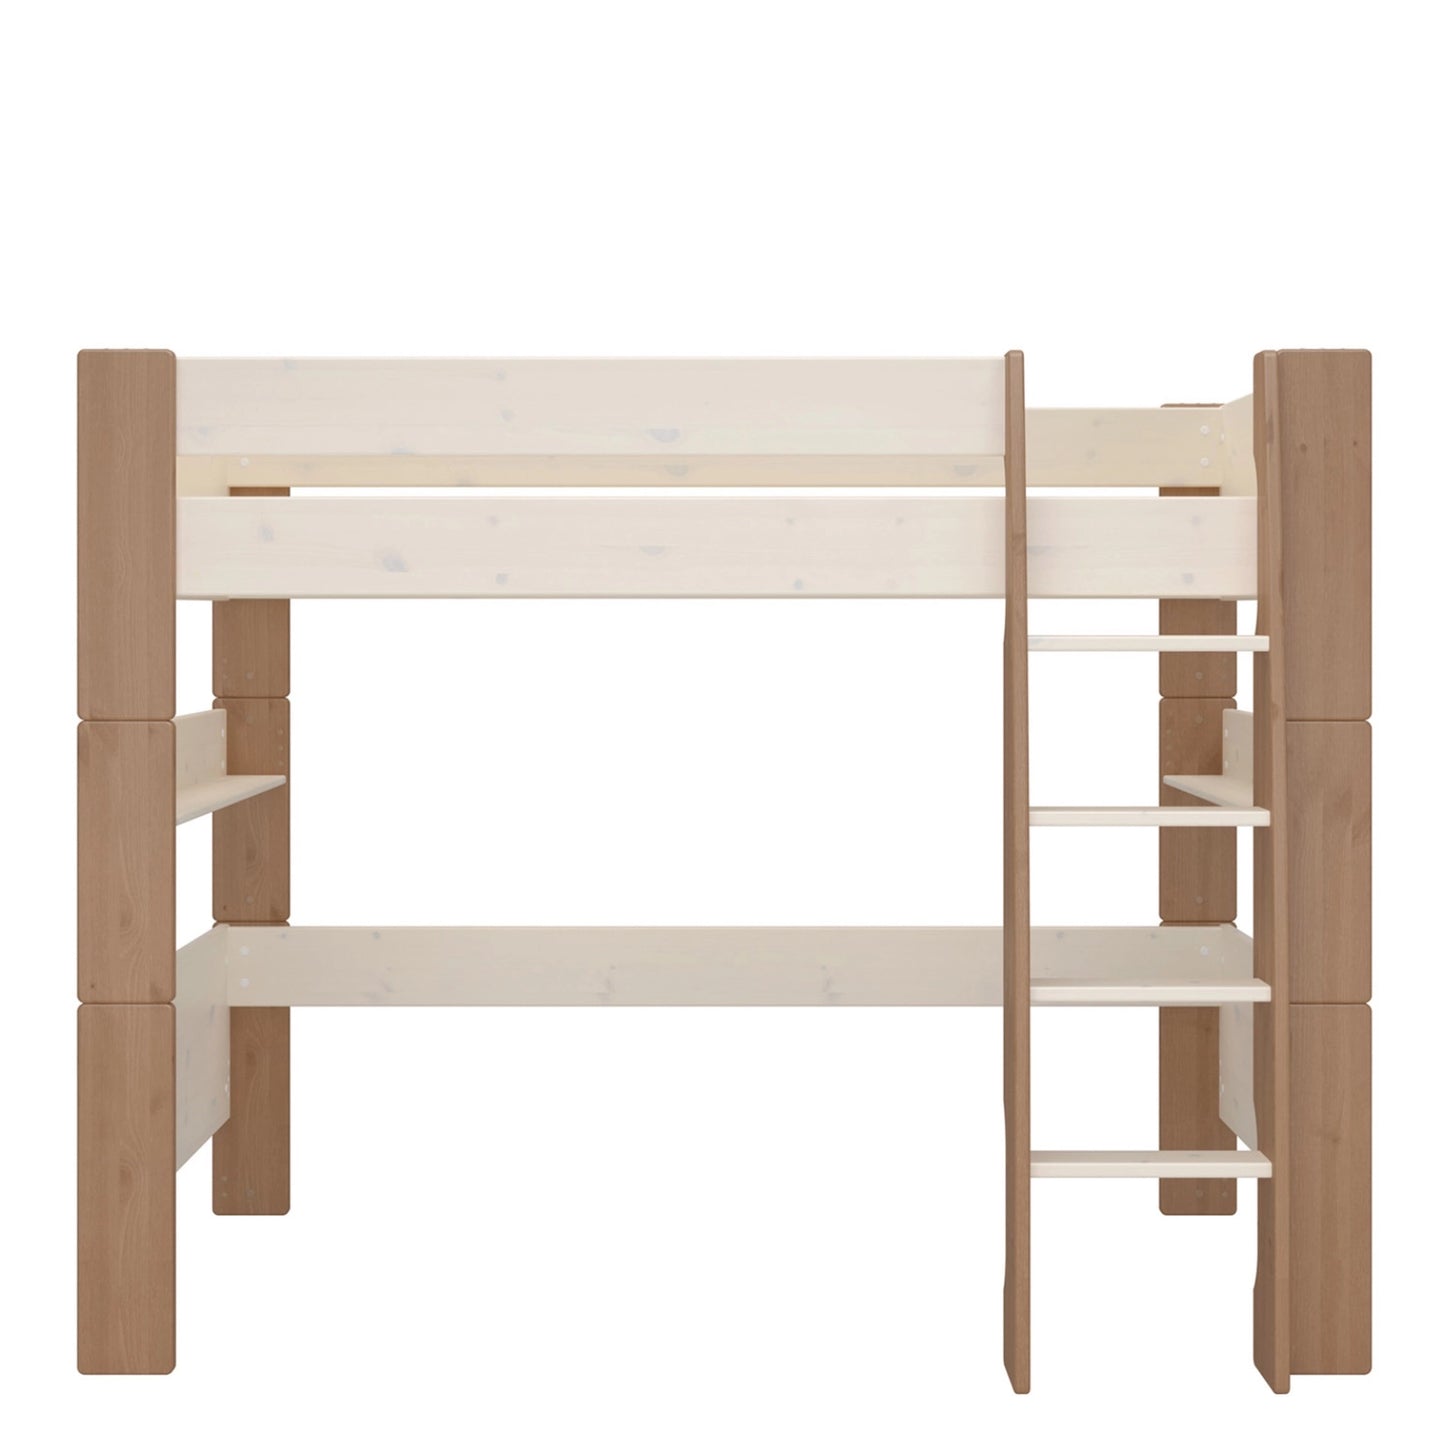 Furniture To Go Steens For Kids High Sleeper in Whitewash Grey Brown Lacquered